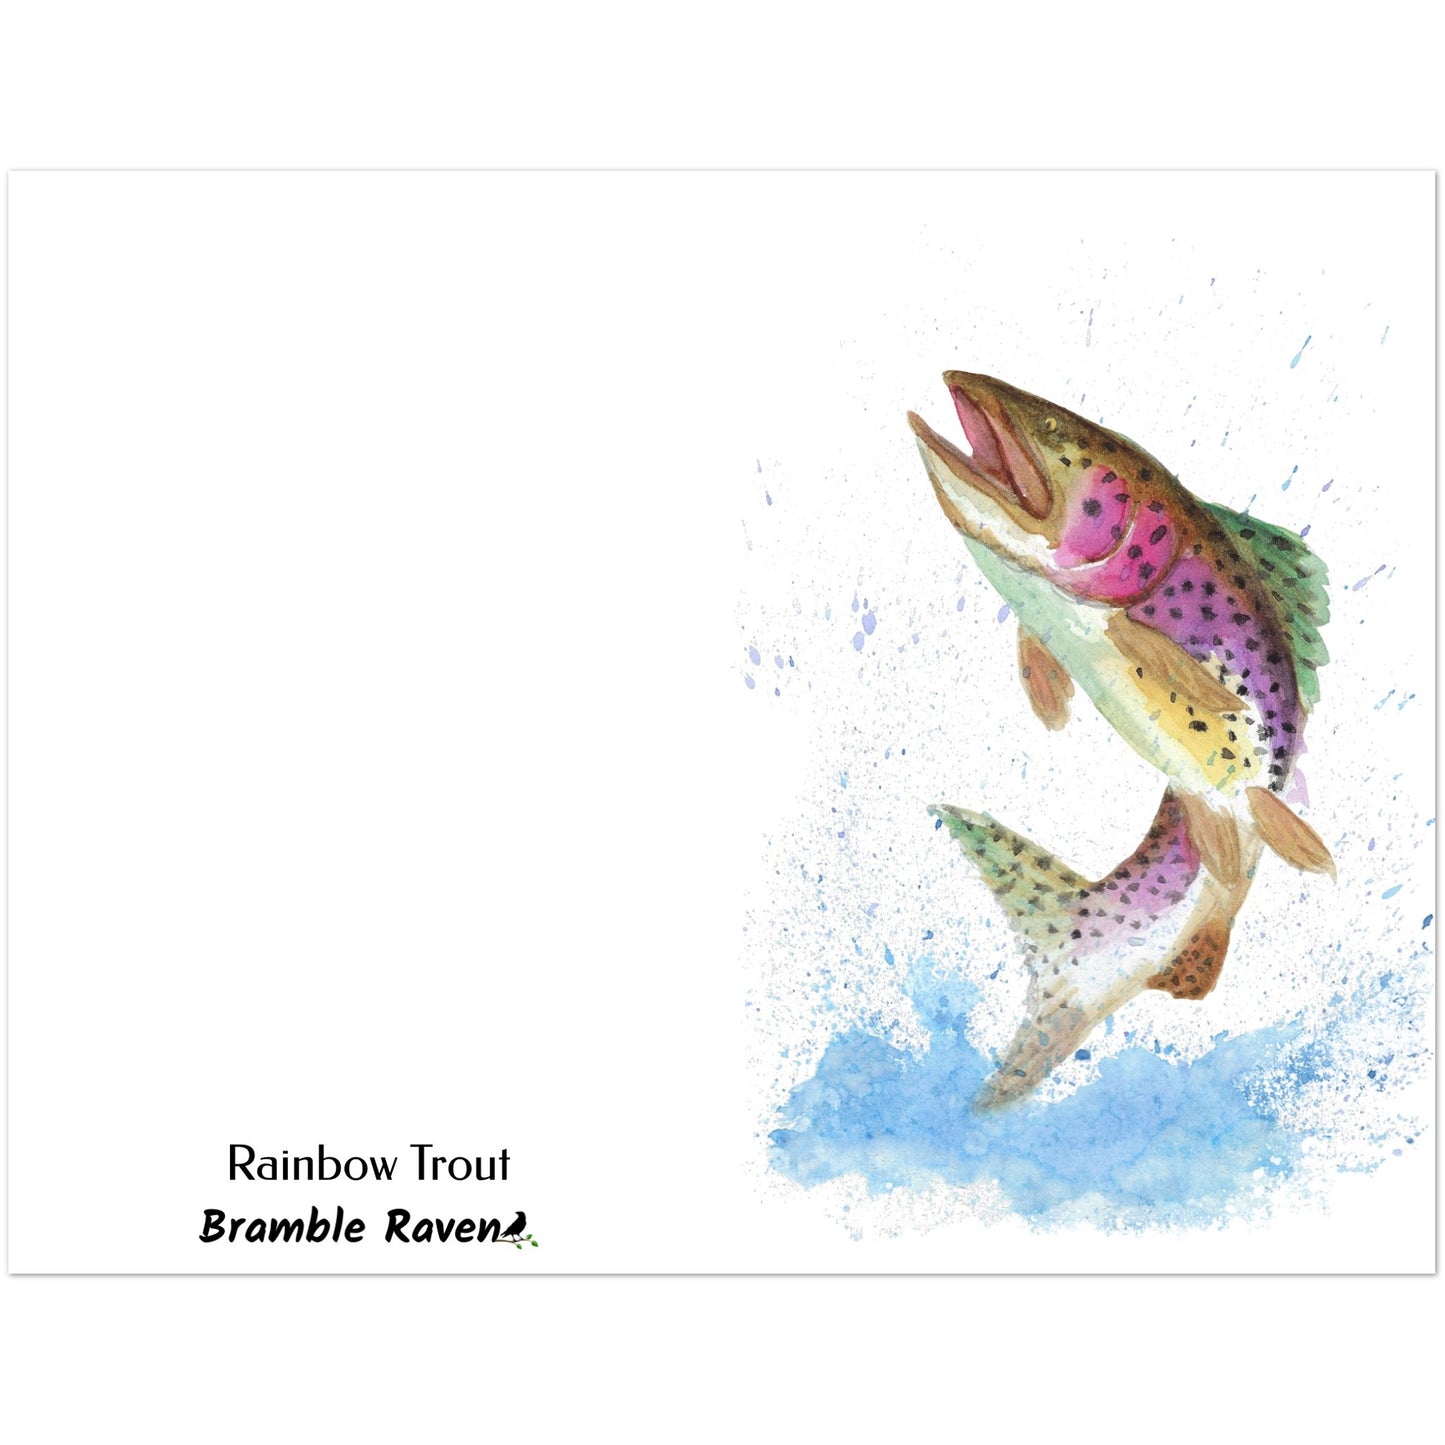 Ten greeting cards with print of watercolor rainbow trout on the front. Inside is blank. Comes with envelopes. Cards measure 5 by 7 inches. Made with 350 gsm 150lb coated paperboard with vibrant printing.